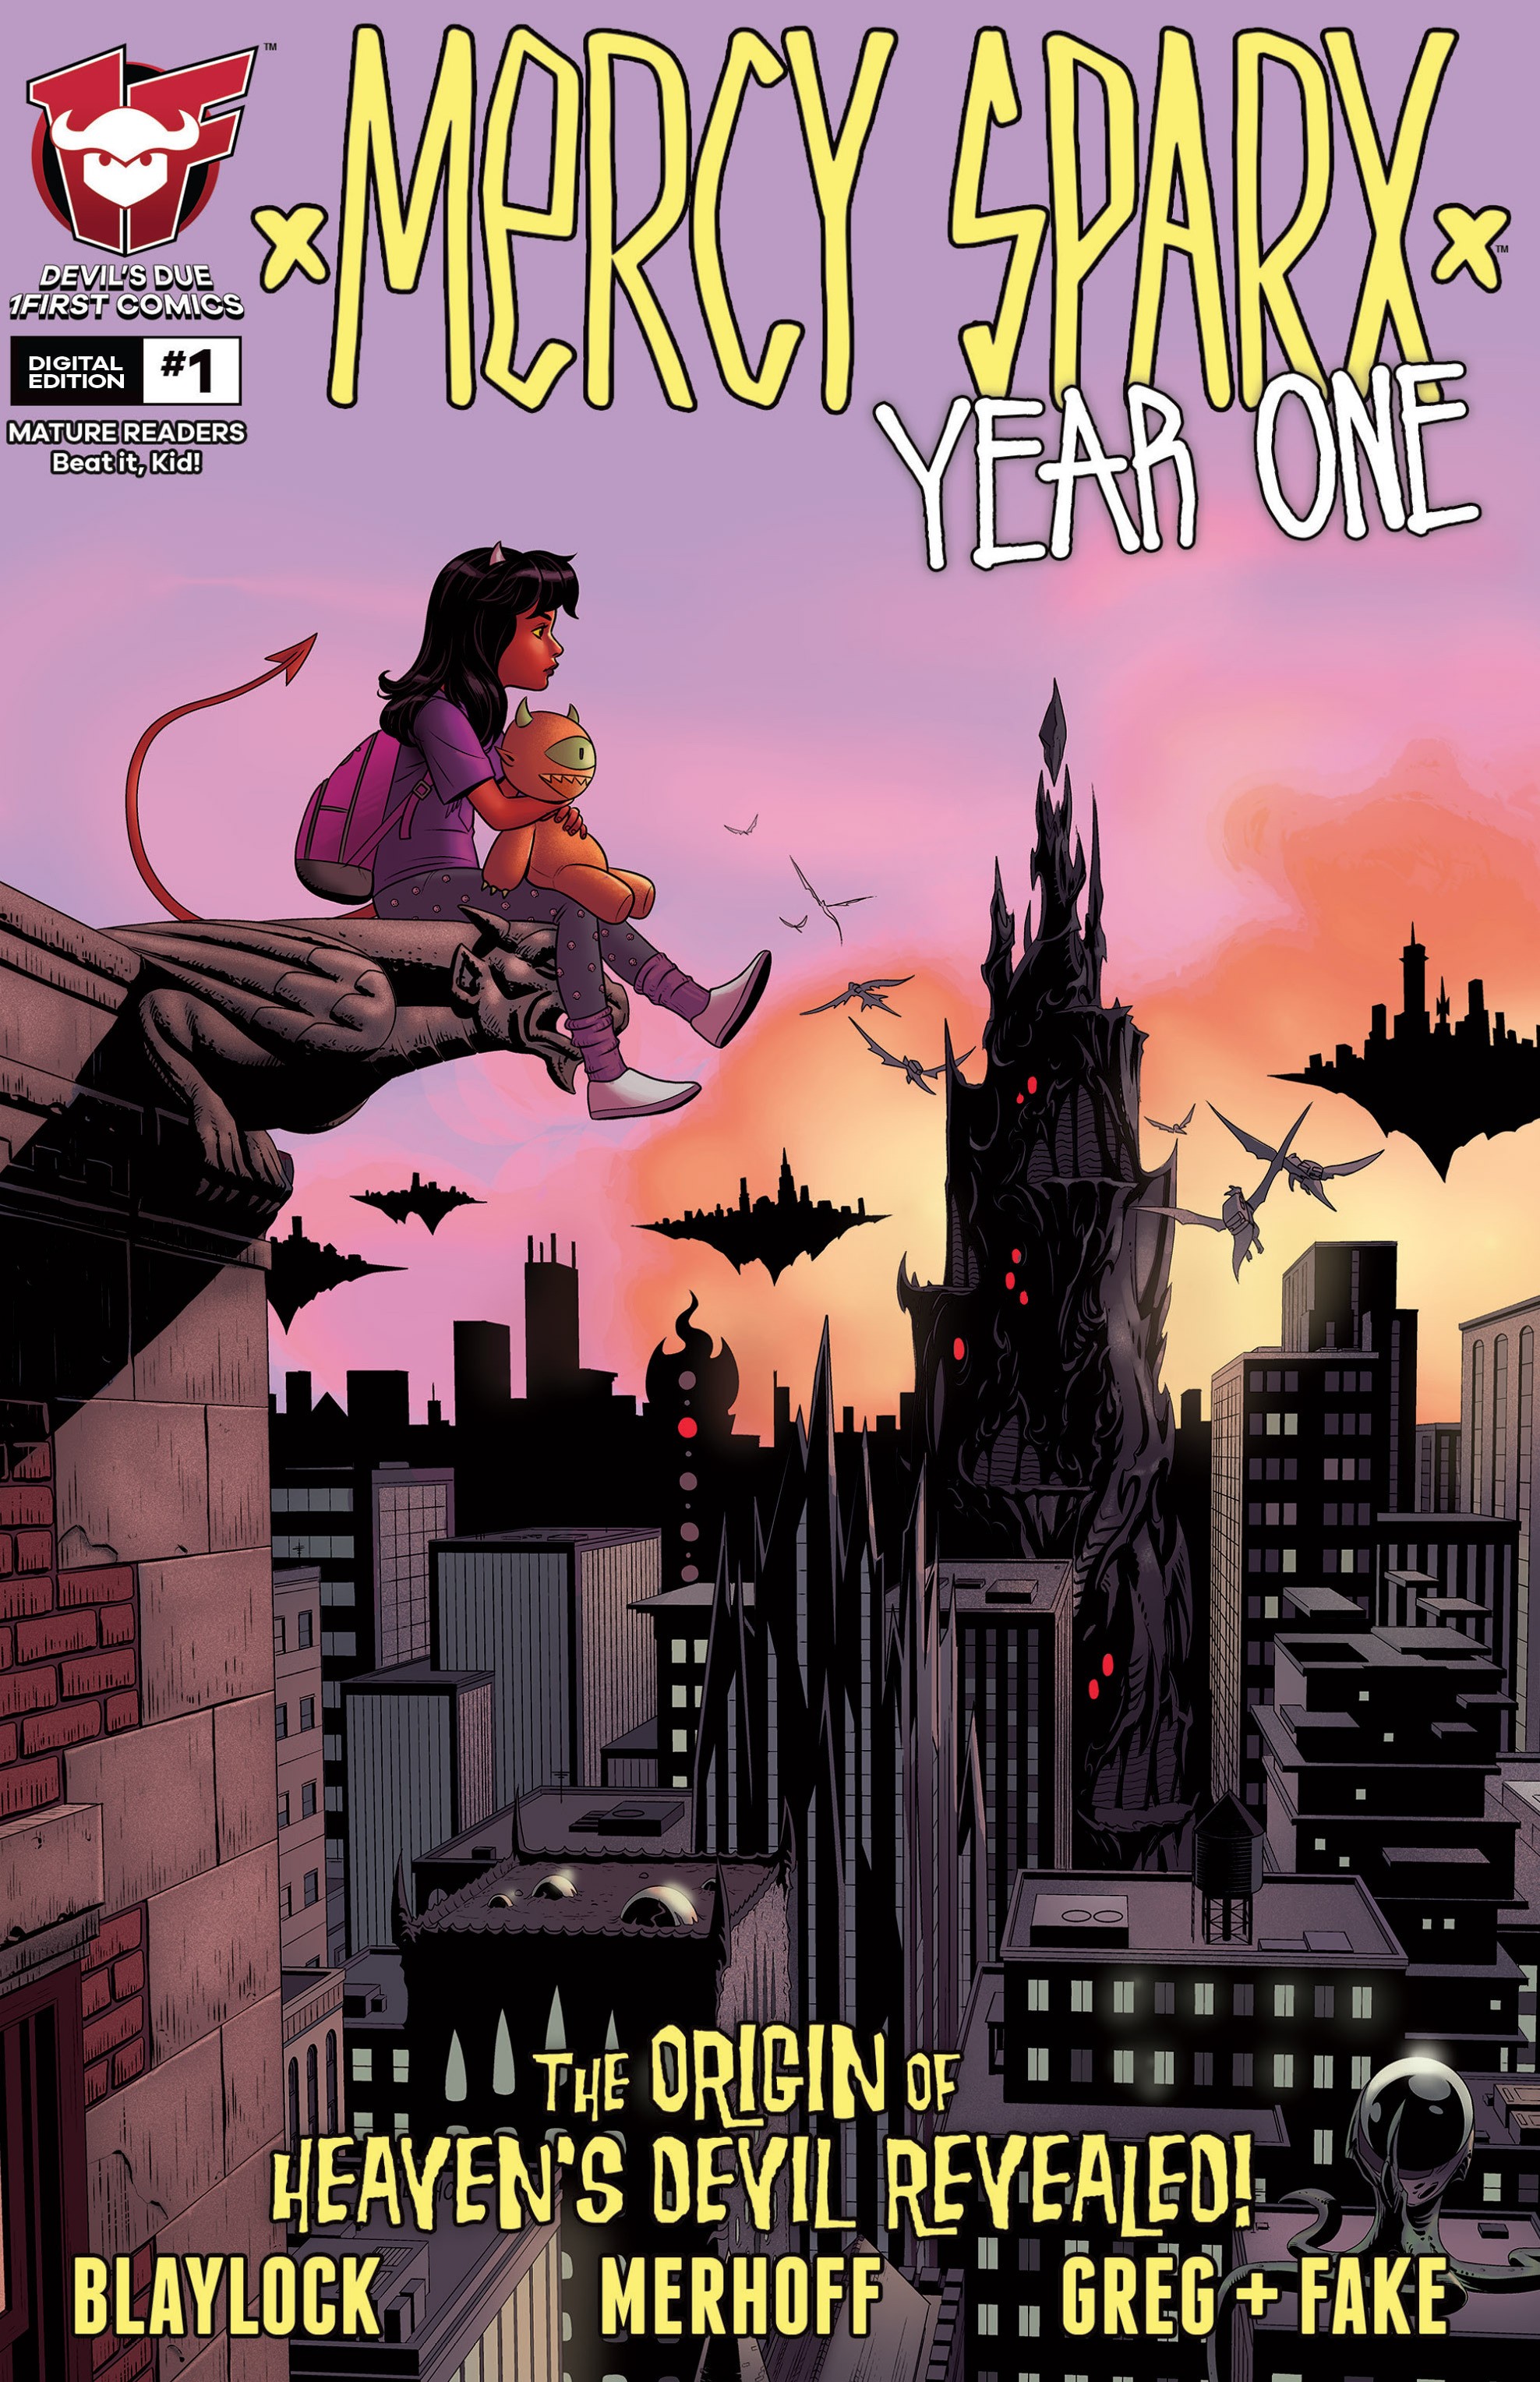 Read online Mercy Sparx Year One comic -  Issue #1 - 1